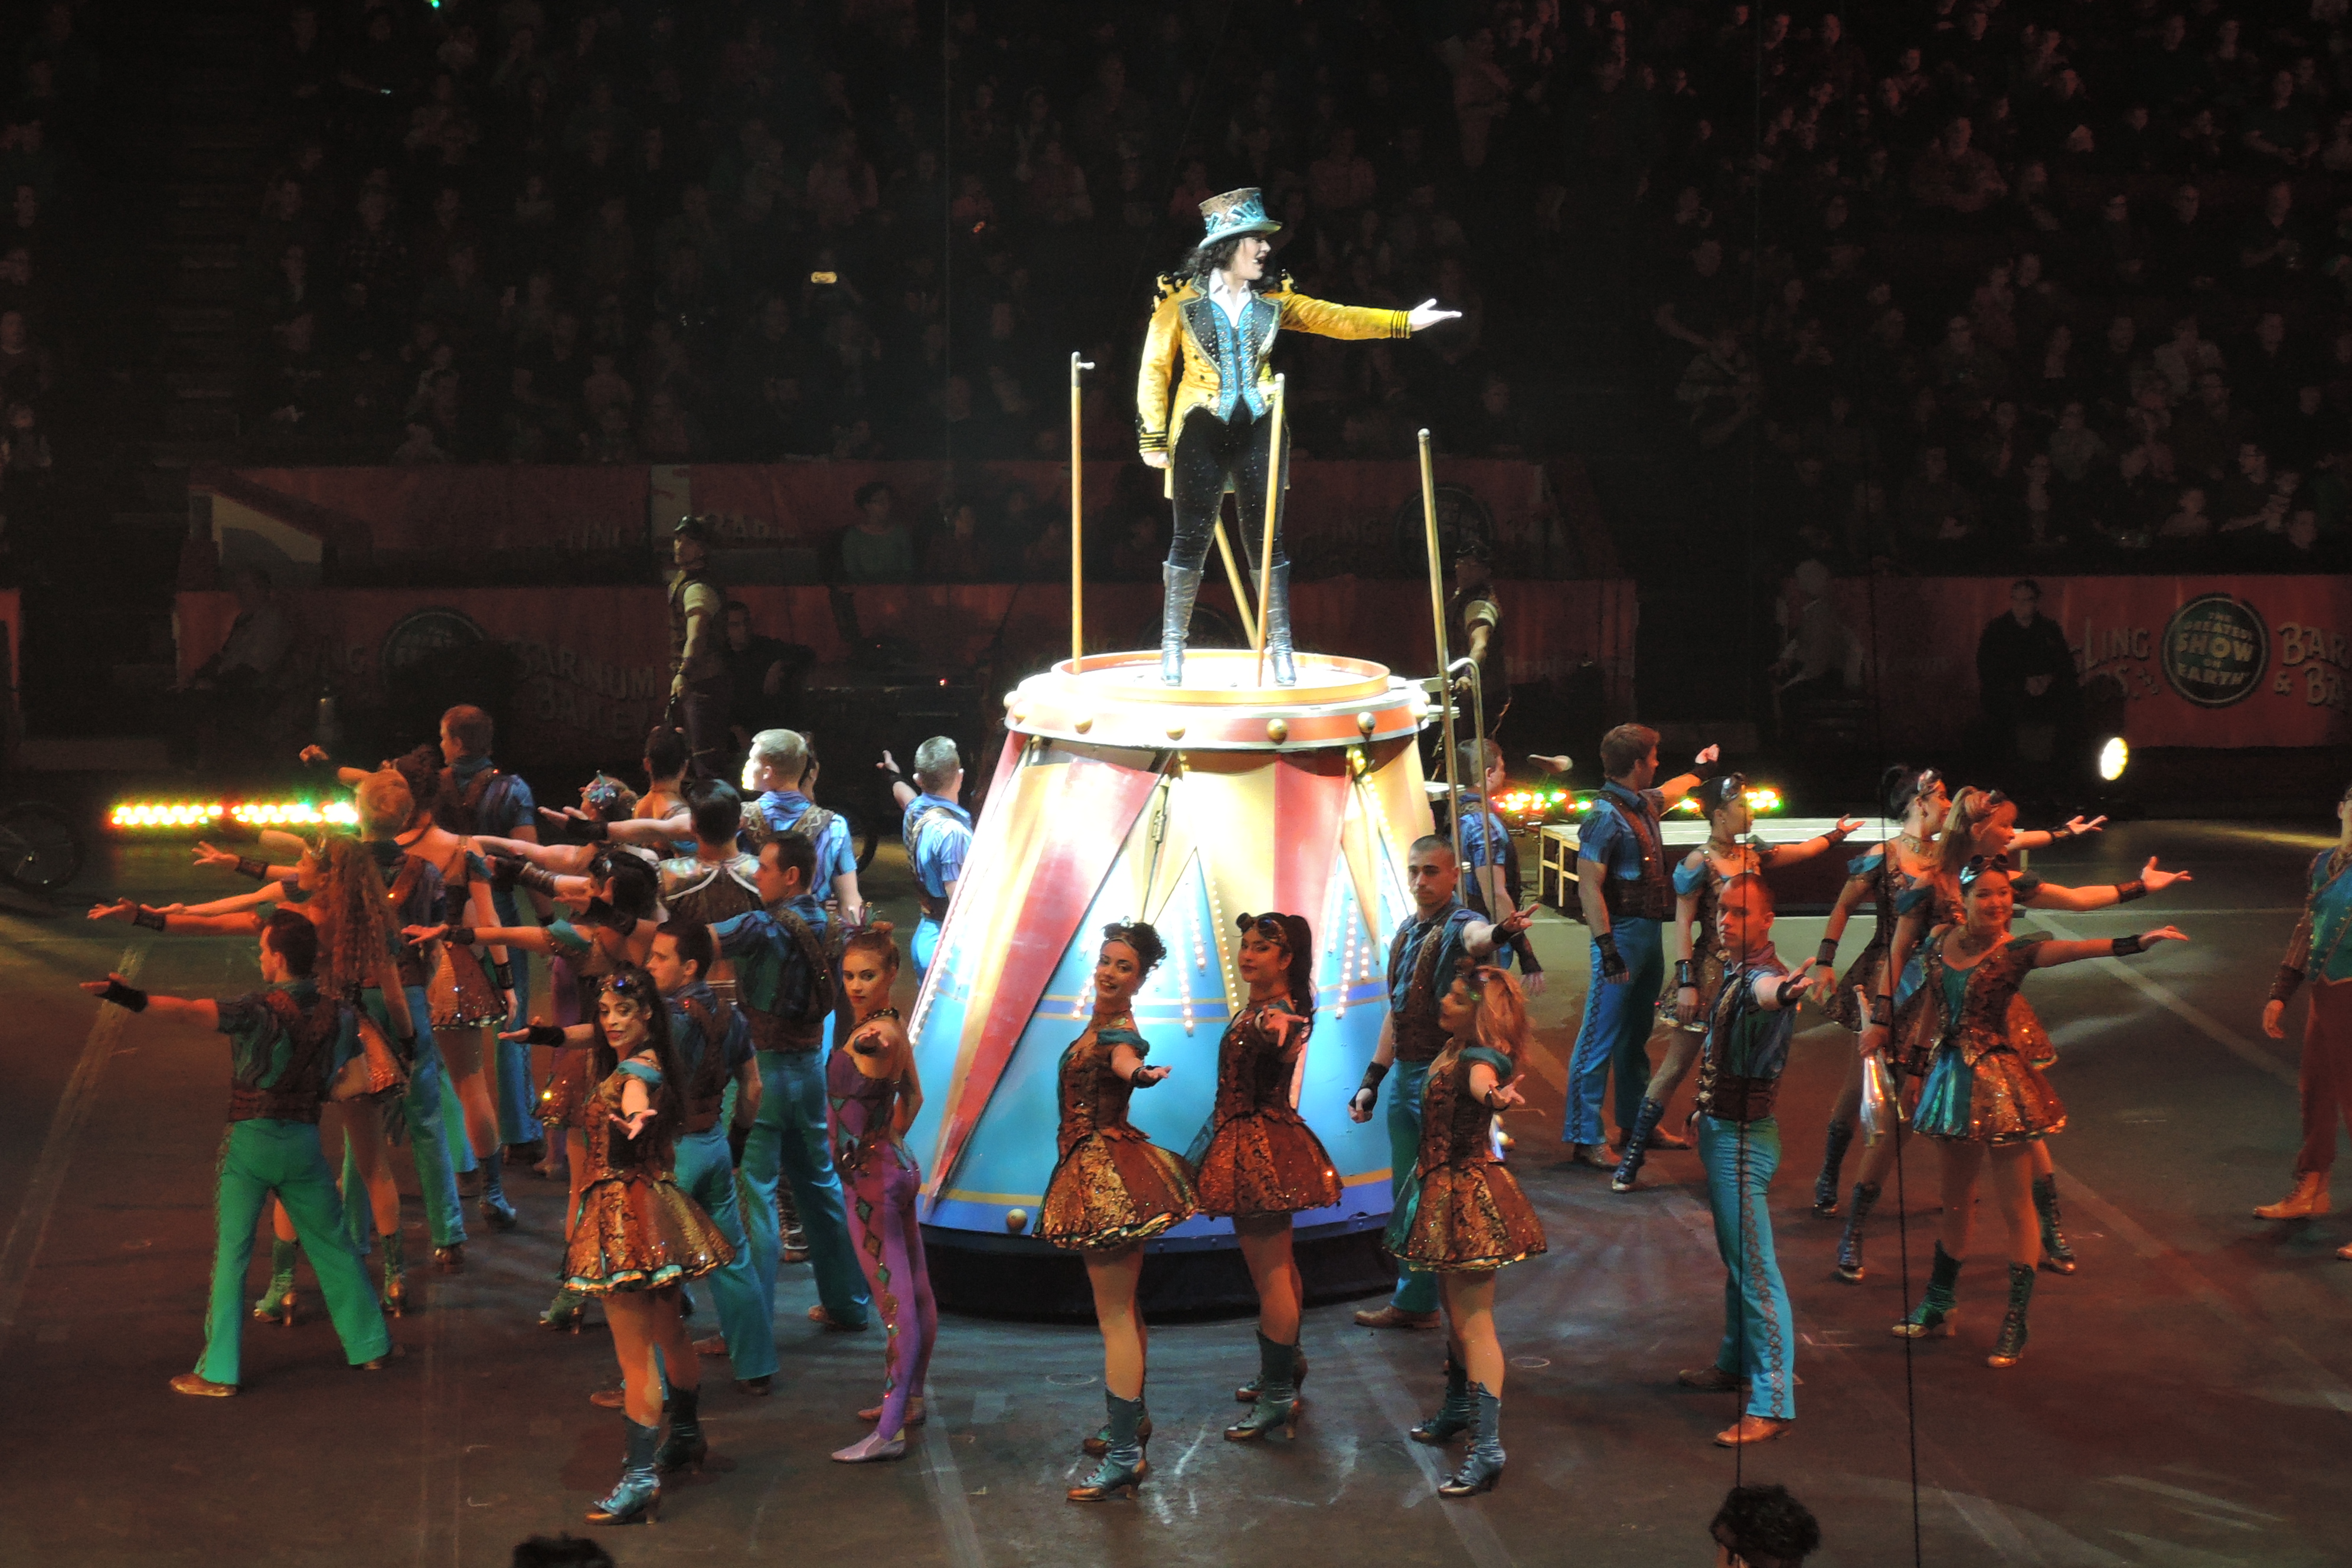 Farewell to Ringling Bros Circus - The Flying Mantis